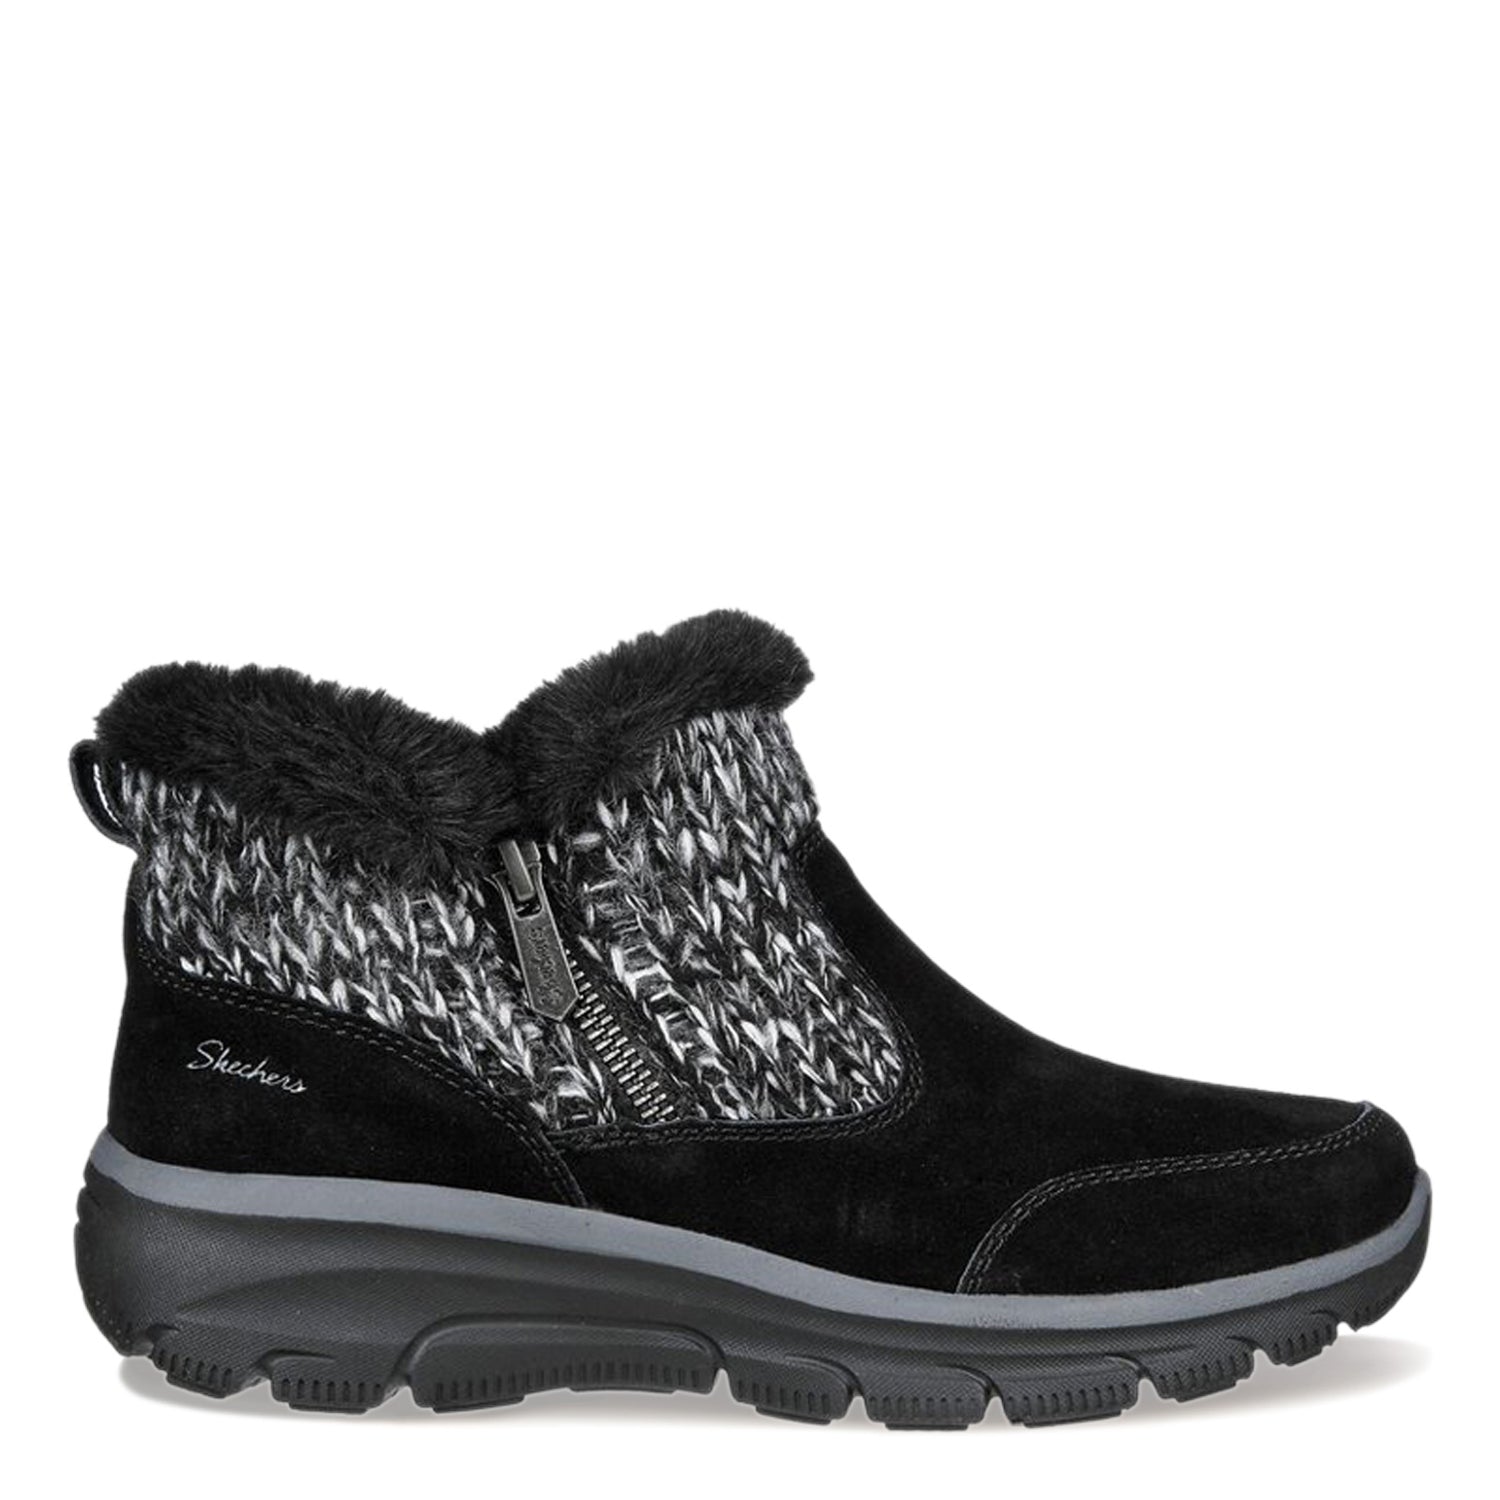 Peltz Shoes  Women's Skechers Relaxed Fit: Easy Going - Warmhearted Boot Black 167329-BLK